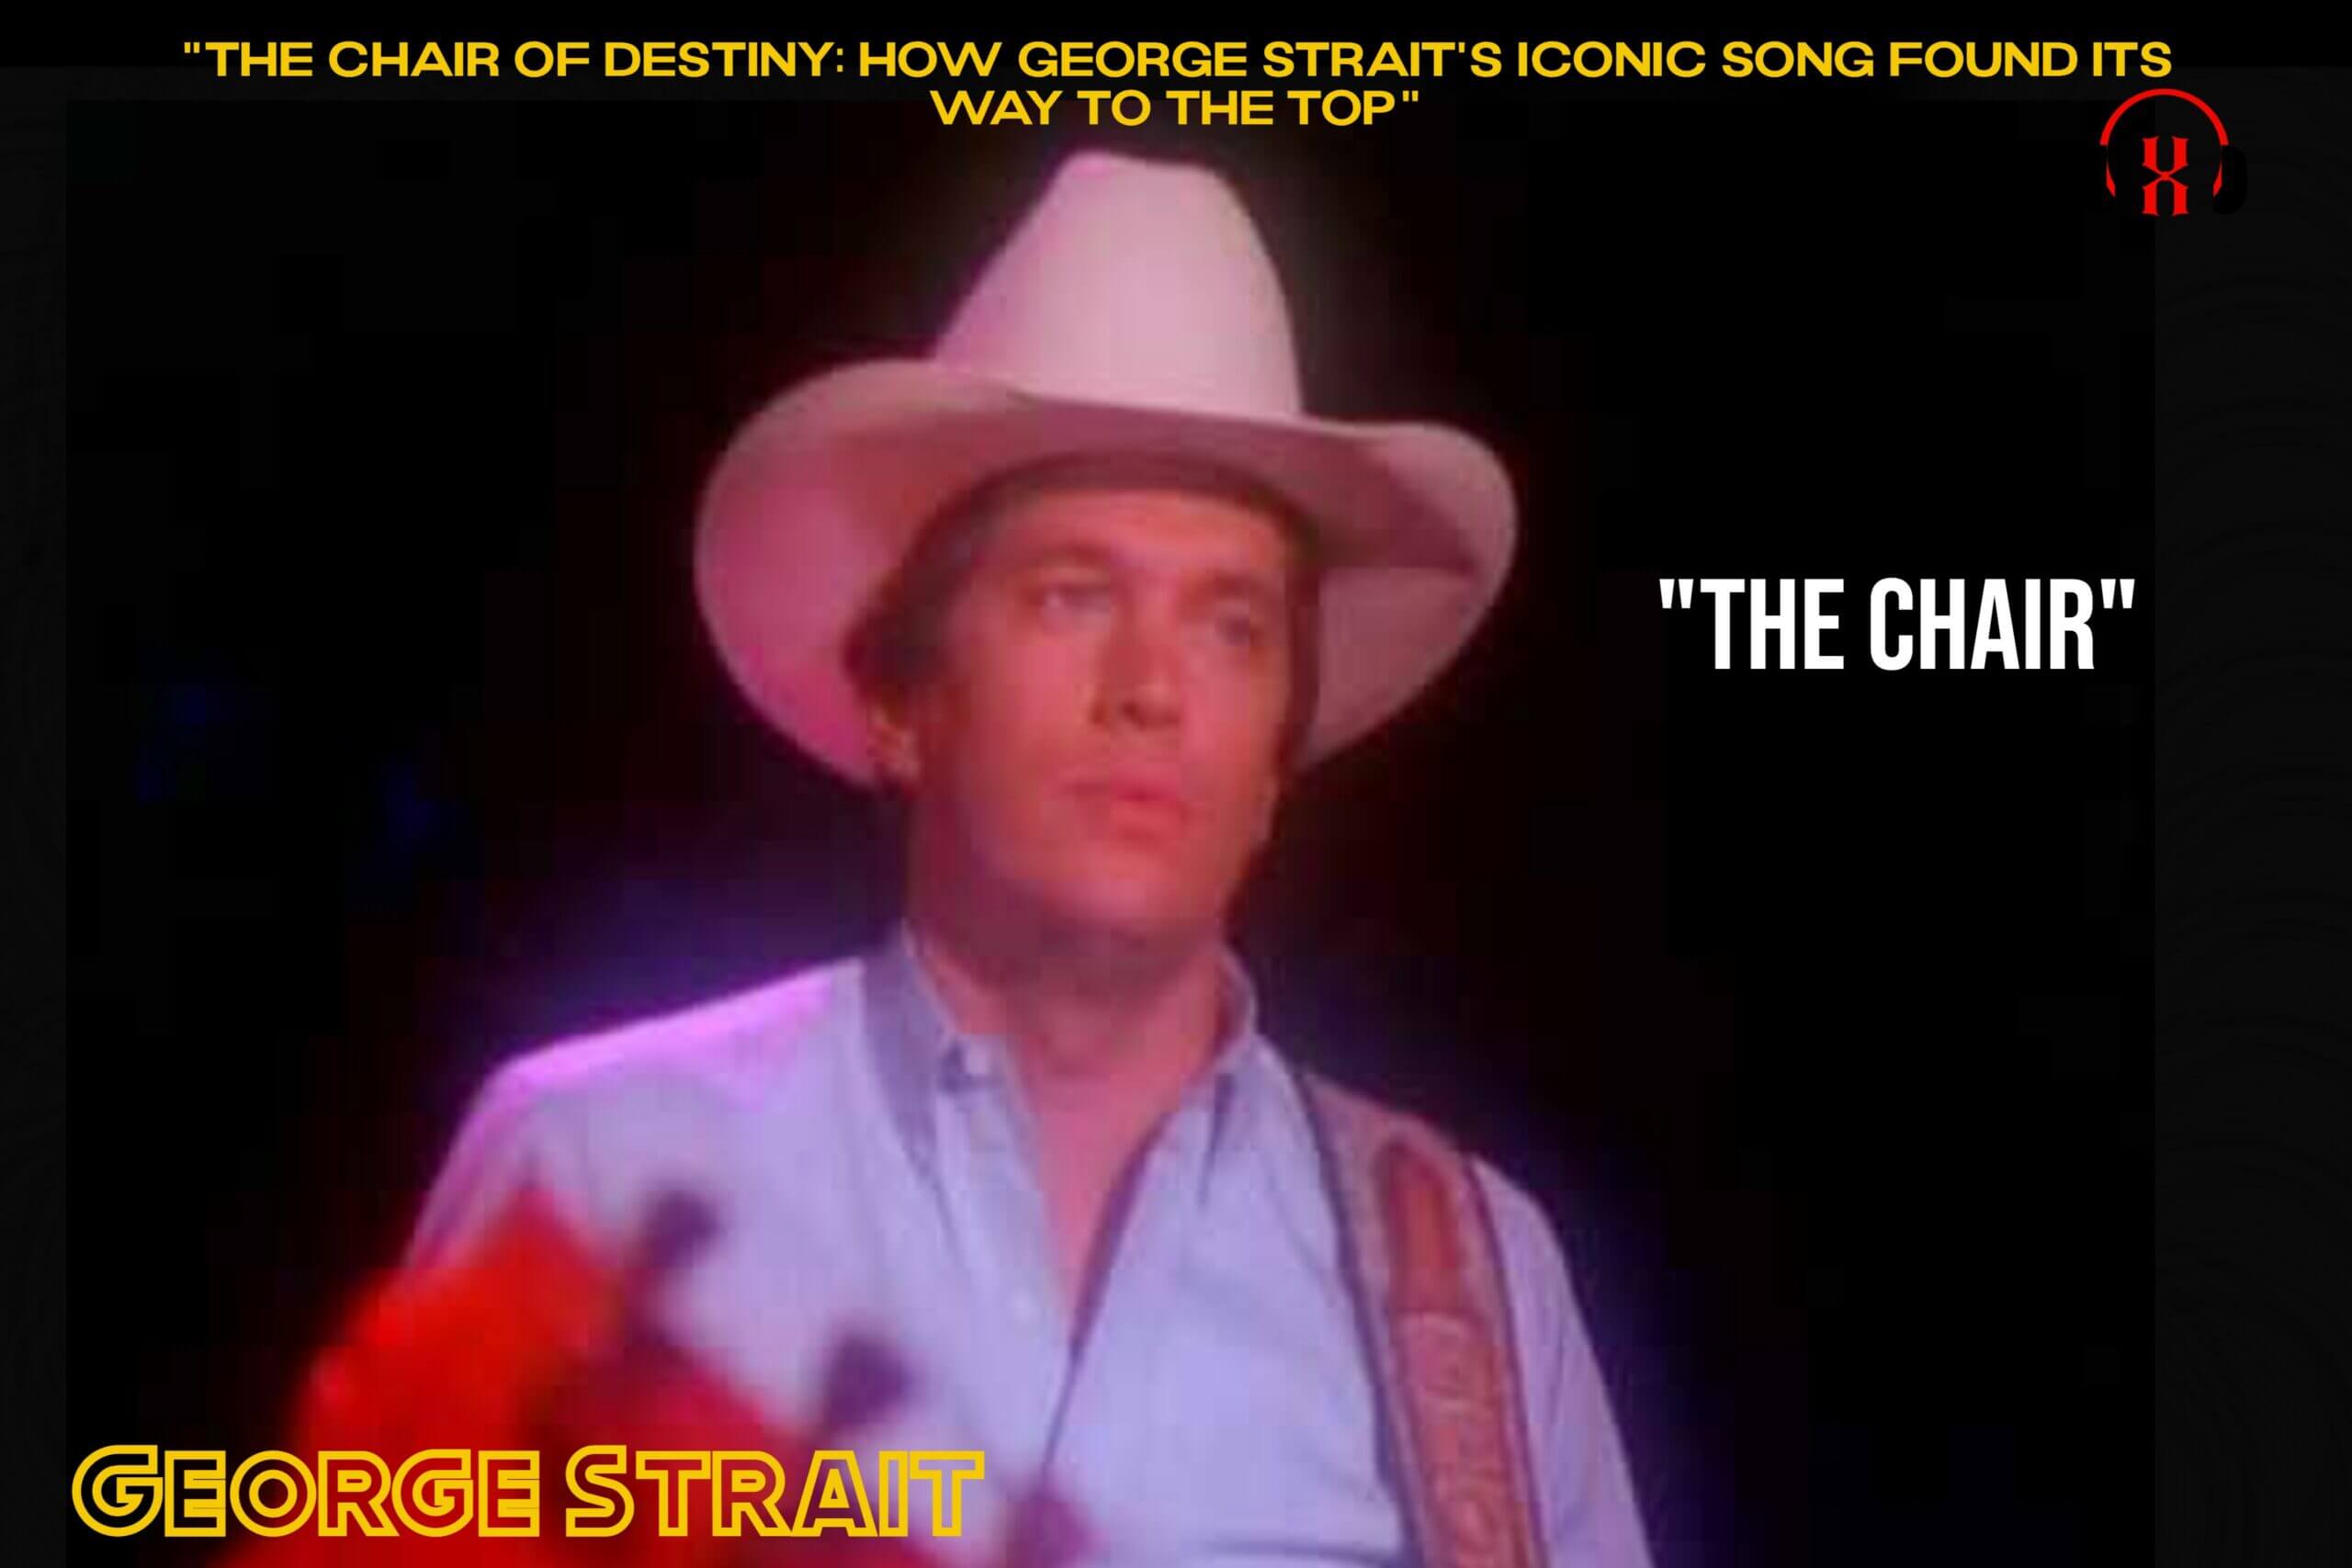 George Strait's Iconic Song The Chair Found its Way to the Top"